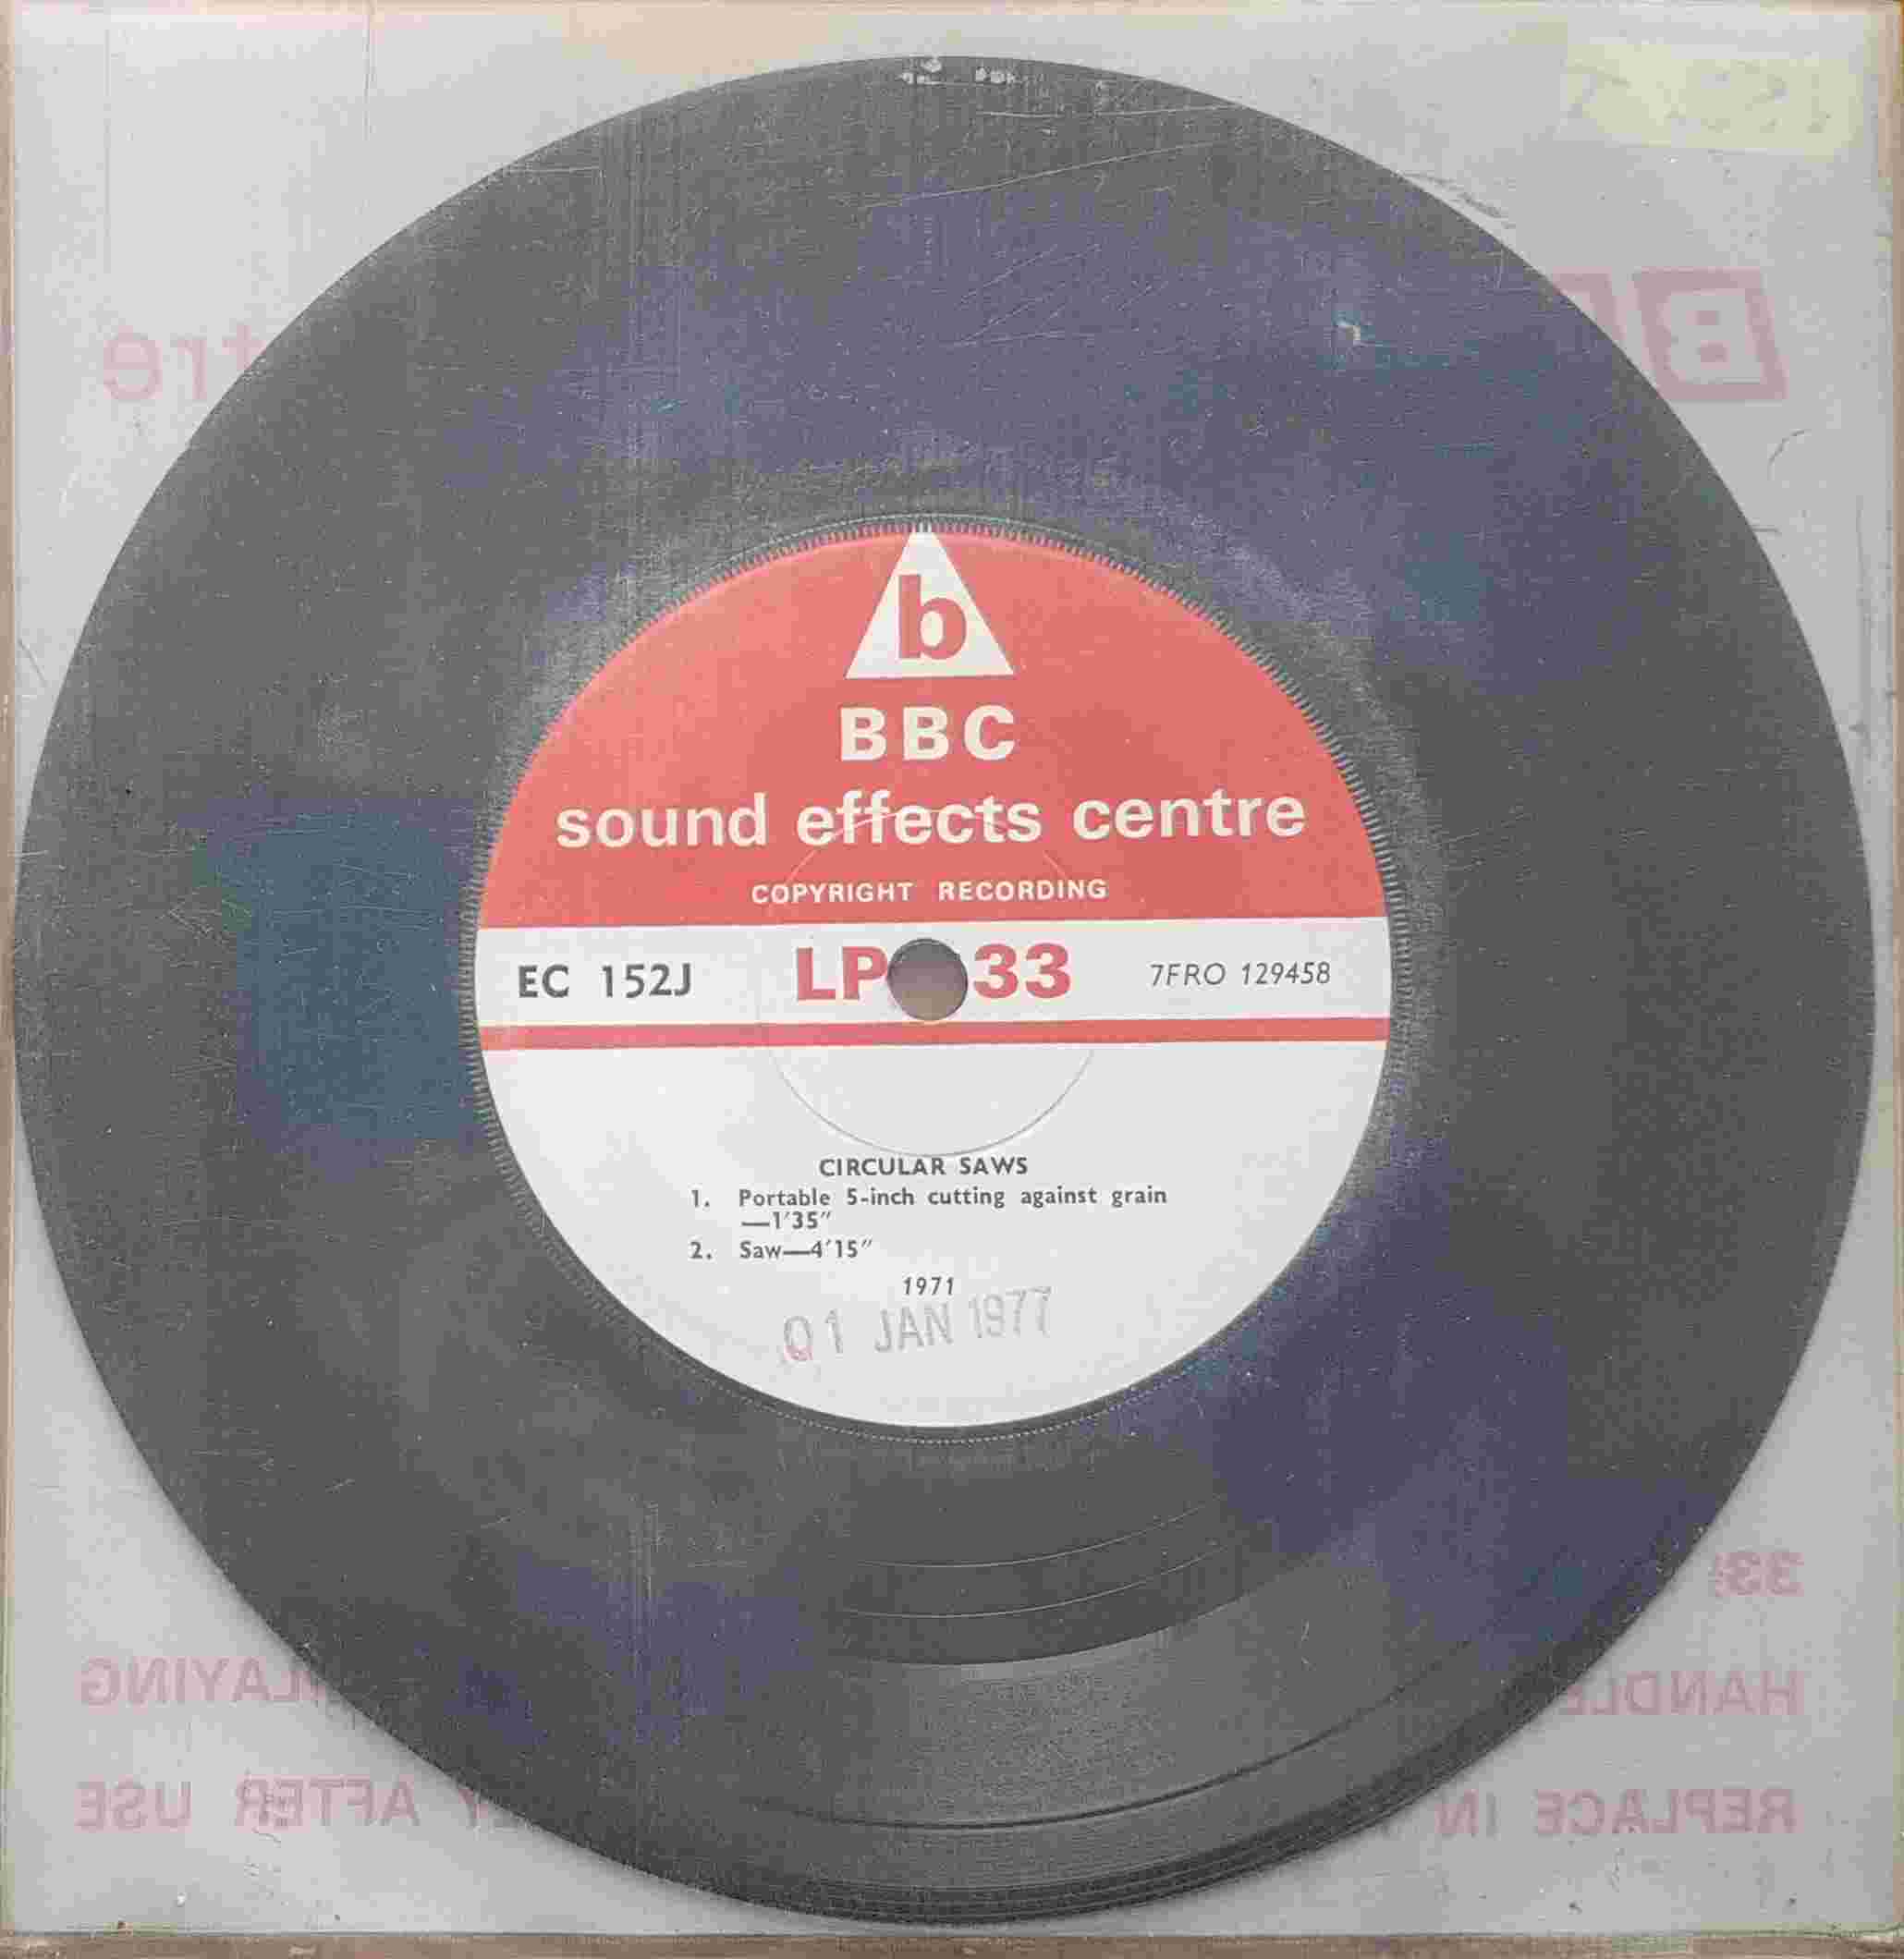 Picture of EC 152J Circular saws by artist Not registered from the BBC records and Tapes library